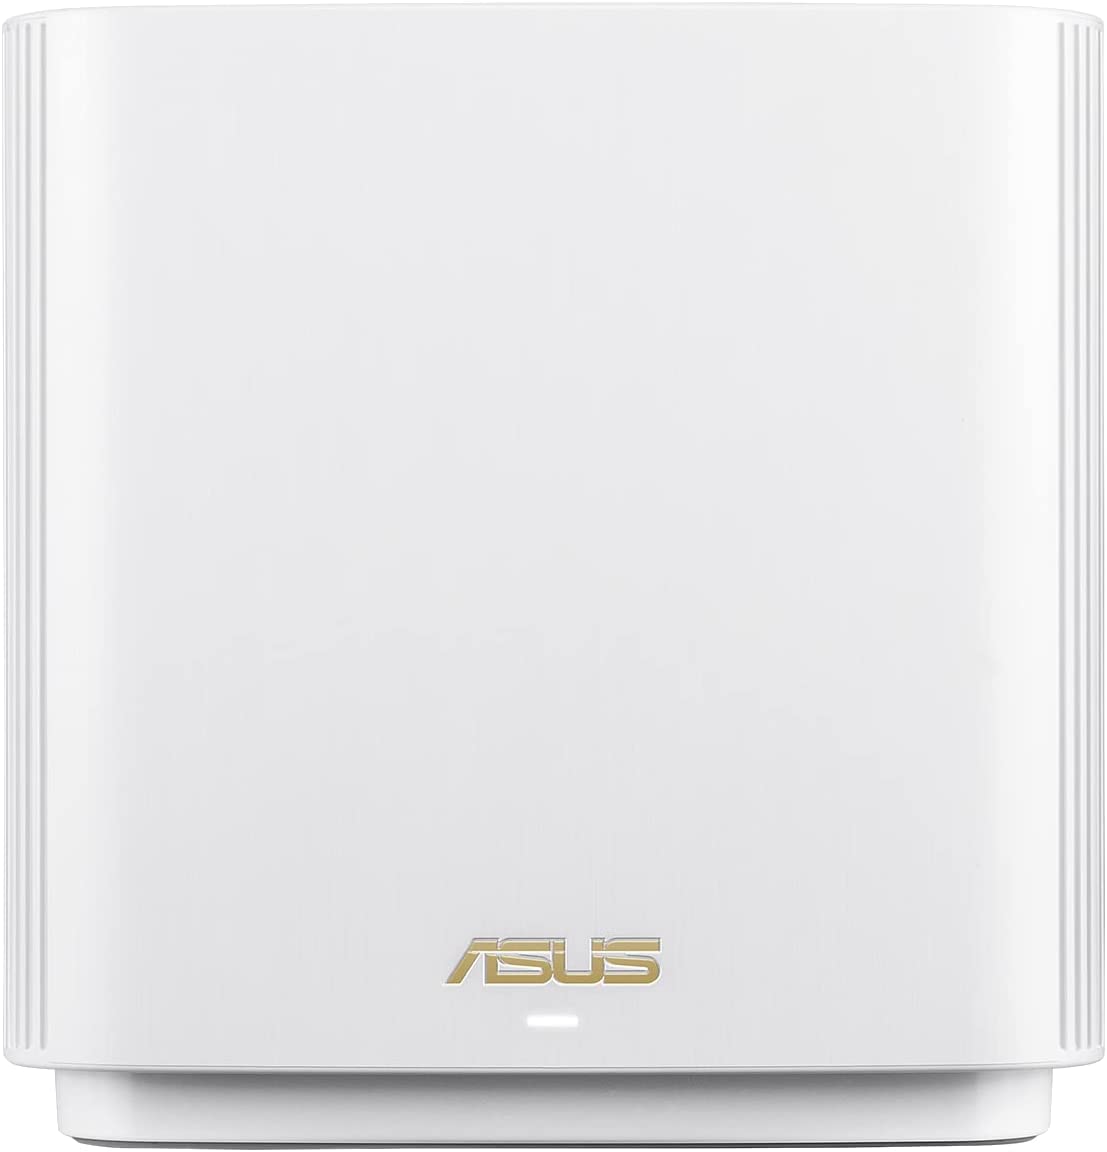 ASUS ZenWiFi XT9 AX7800 Tri-Band WiFi6 Mesh WiFiSystem (1Pack), 802.11ax, up to 2850 sq ft &amp; 4+ Rooms, AiMesh, Lifetime Free Internet Security, Parental Controls, 2.5G WAN Port, UNII 4, White